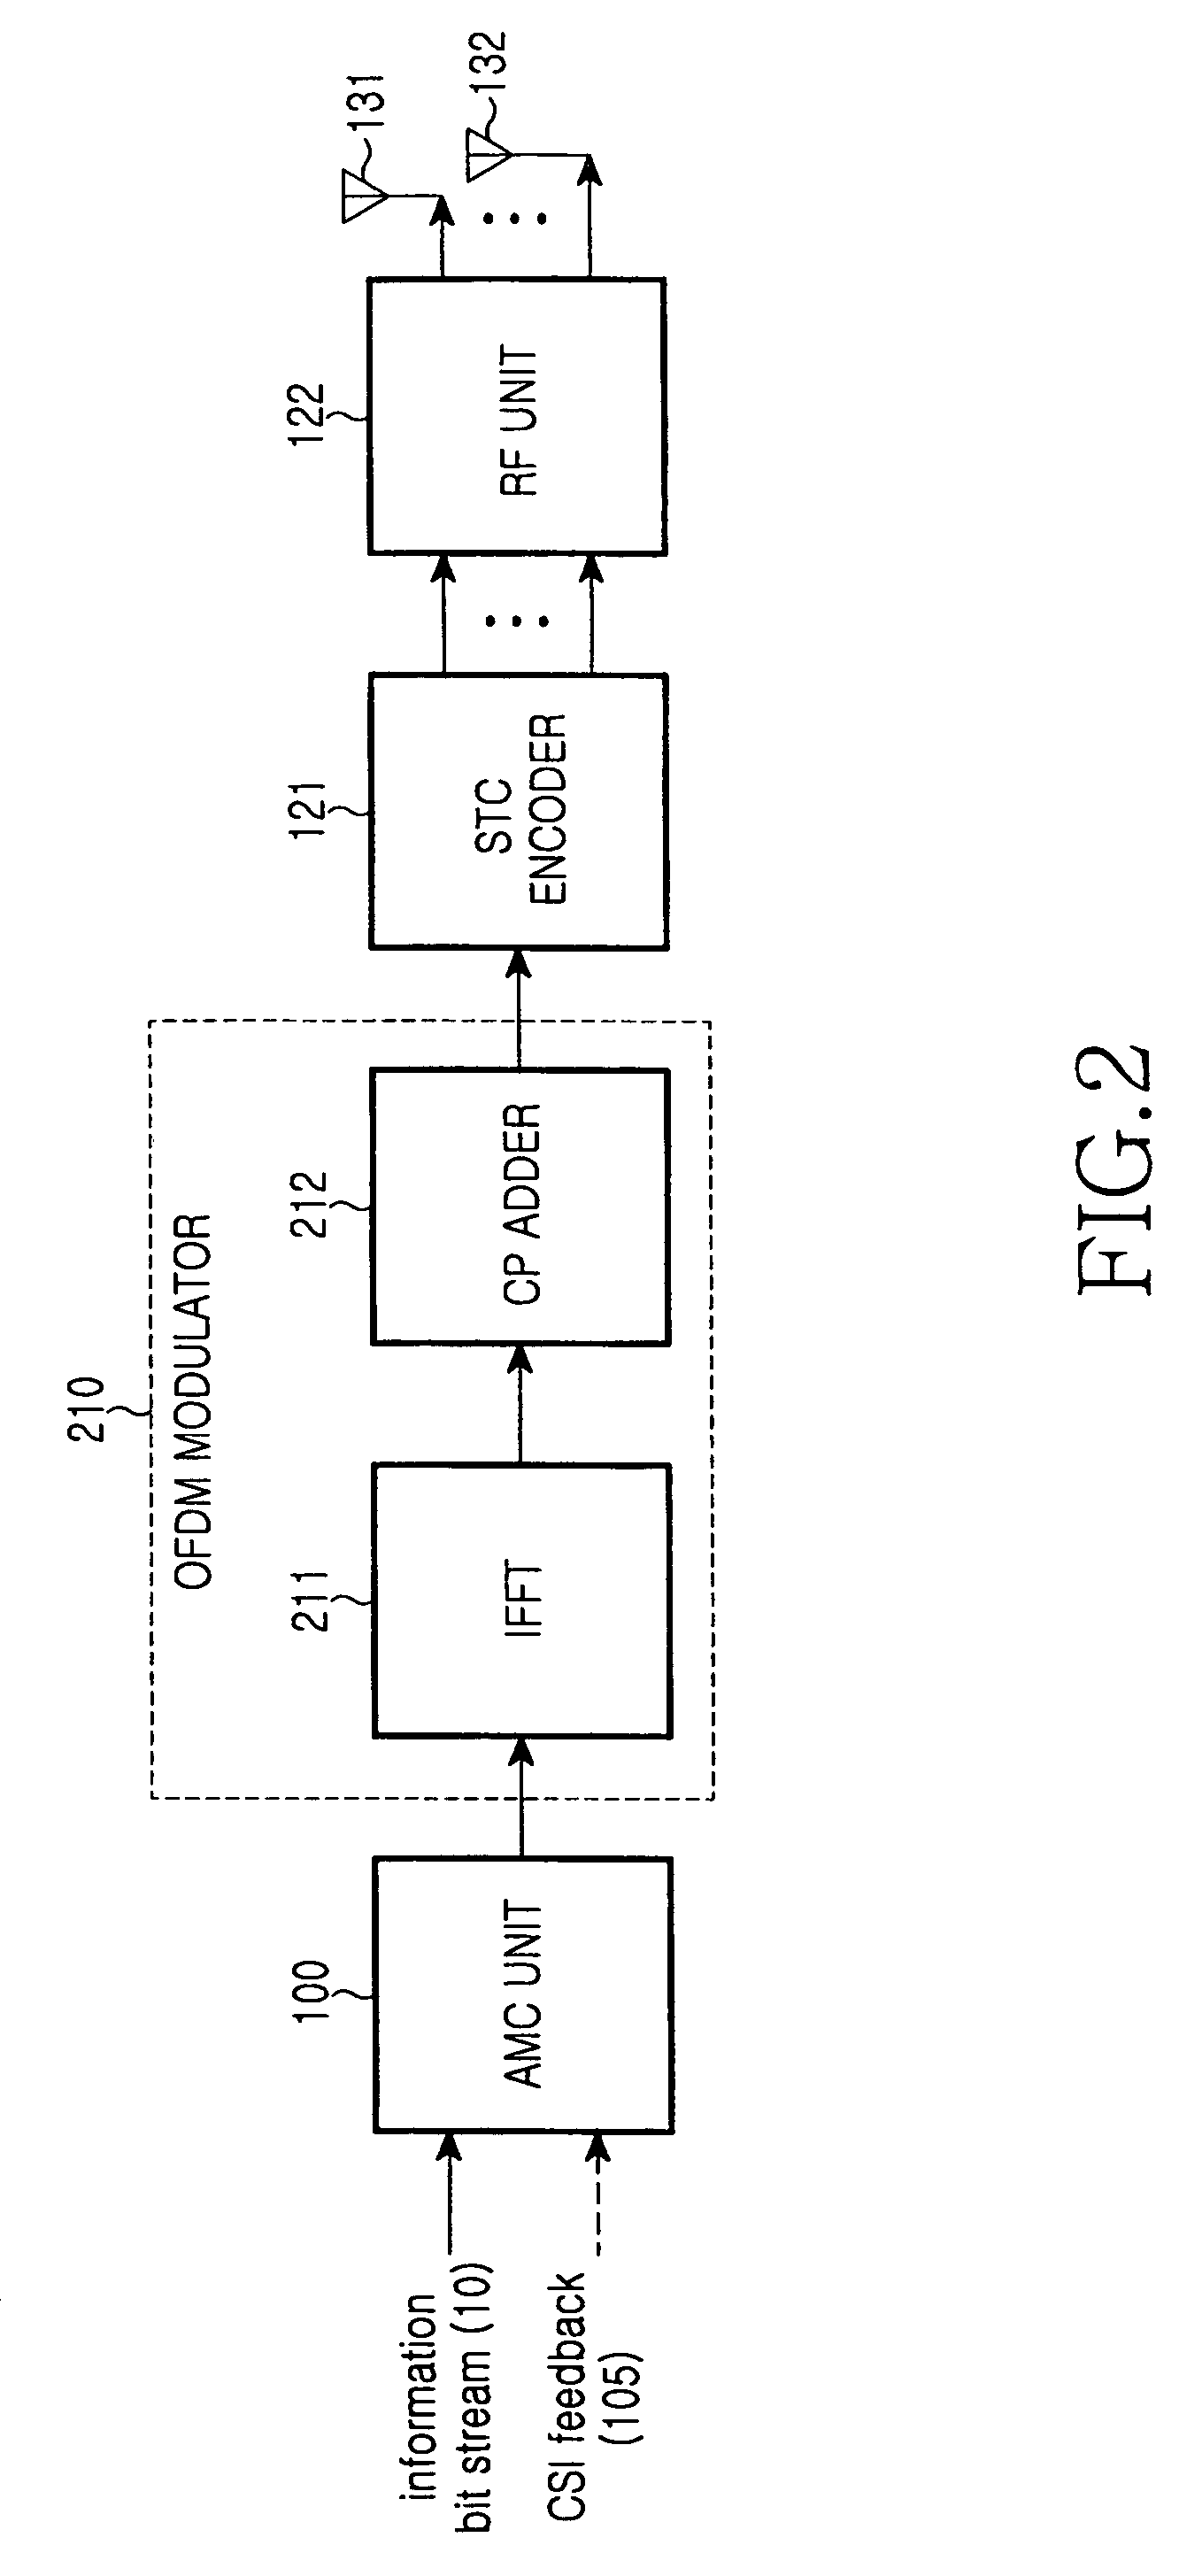 Apparatus and method for transmitting/receiving data in a multi-antenna communication system